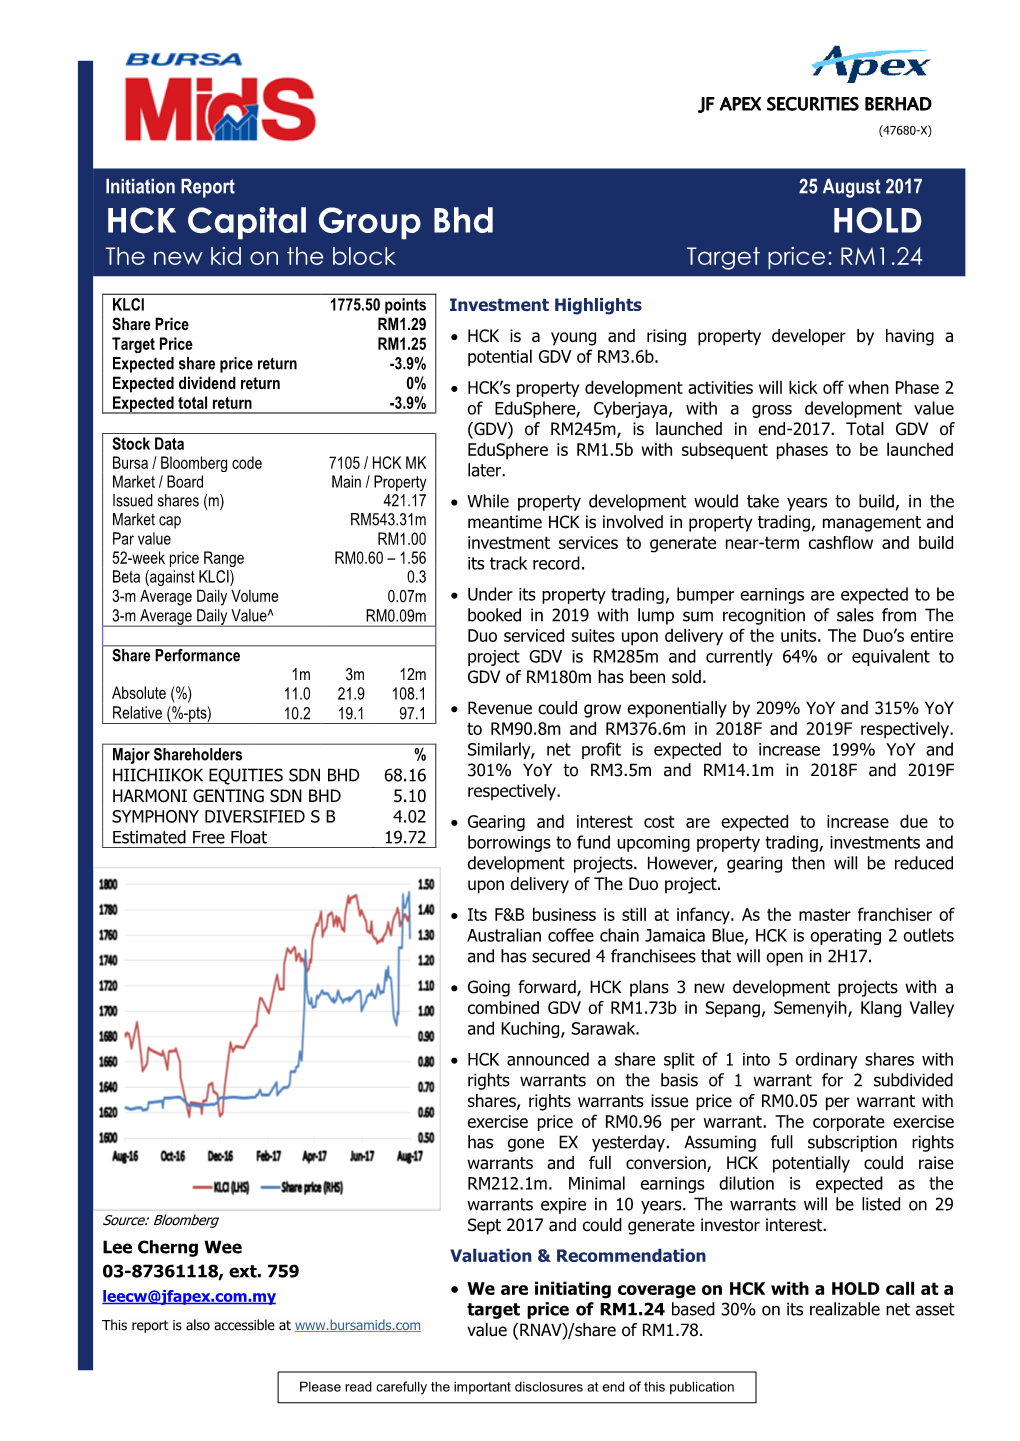 HCK Capital Group Bhd HOLD the New Kid on the Block Target Price: RM1.24